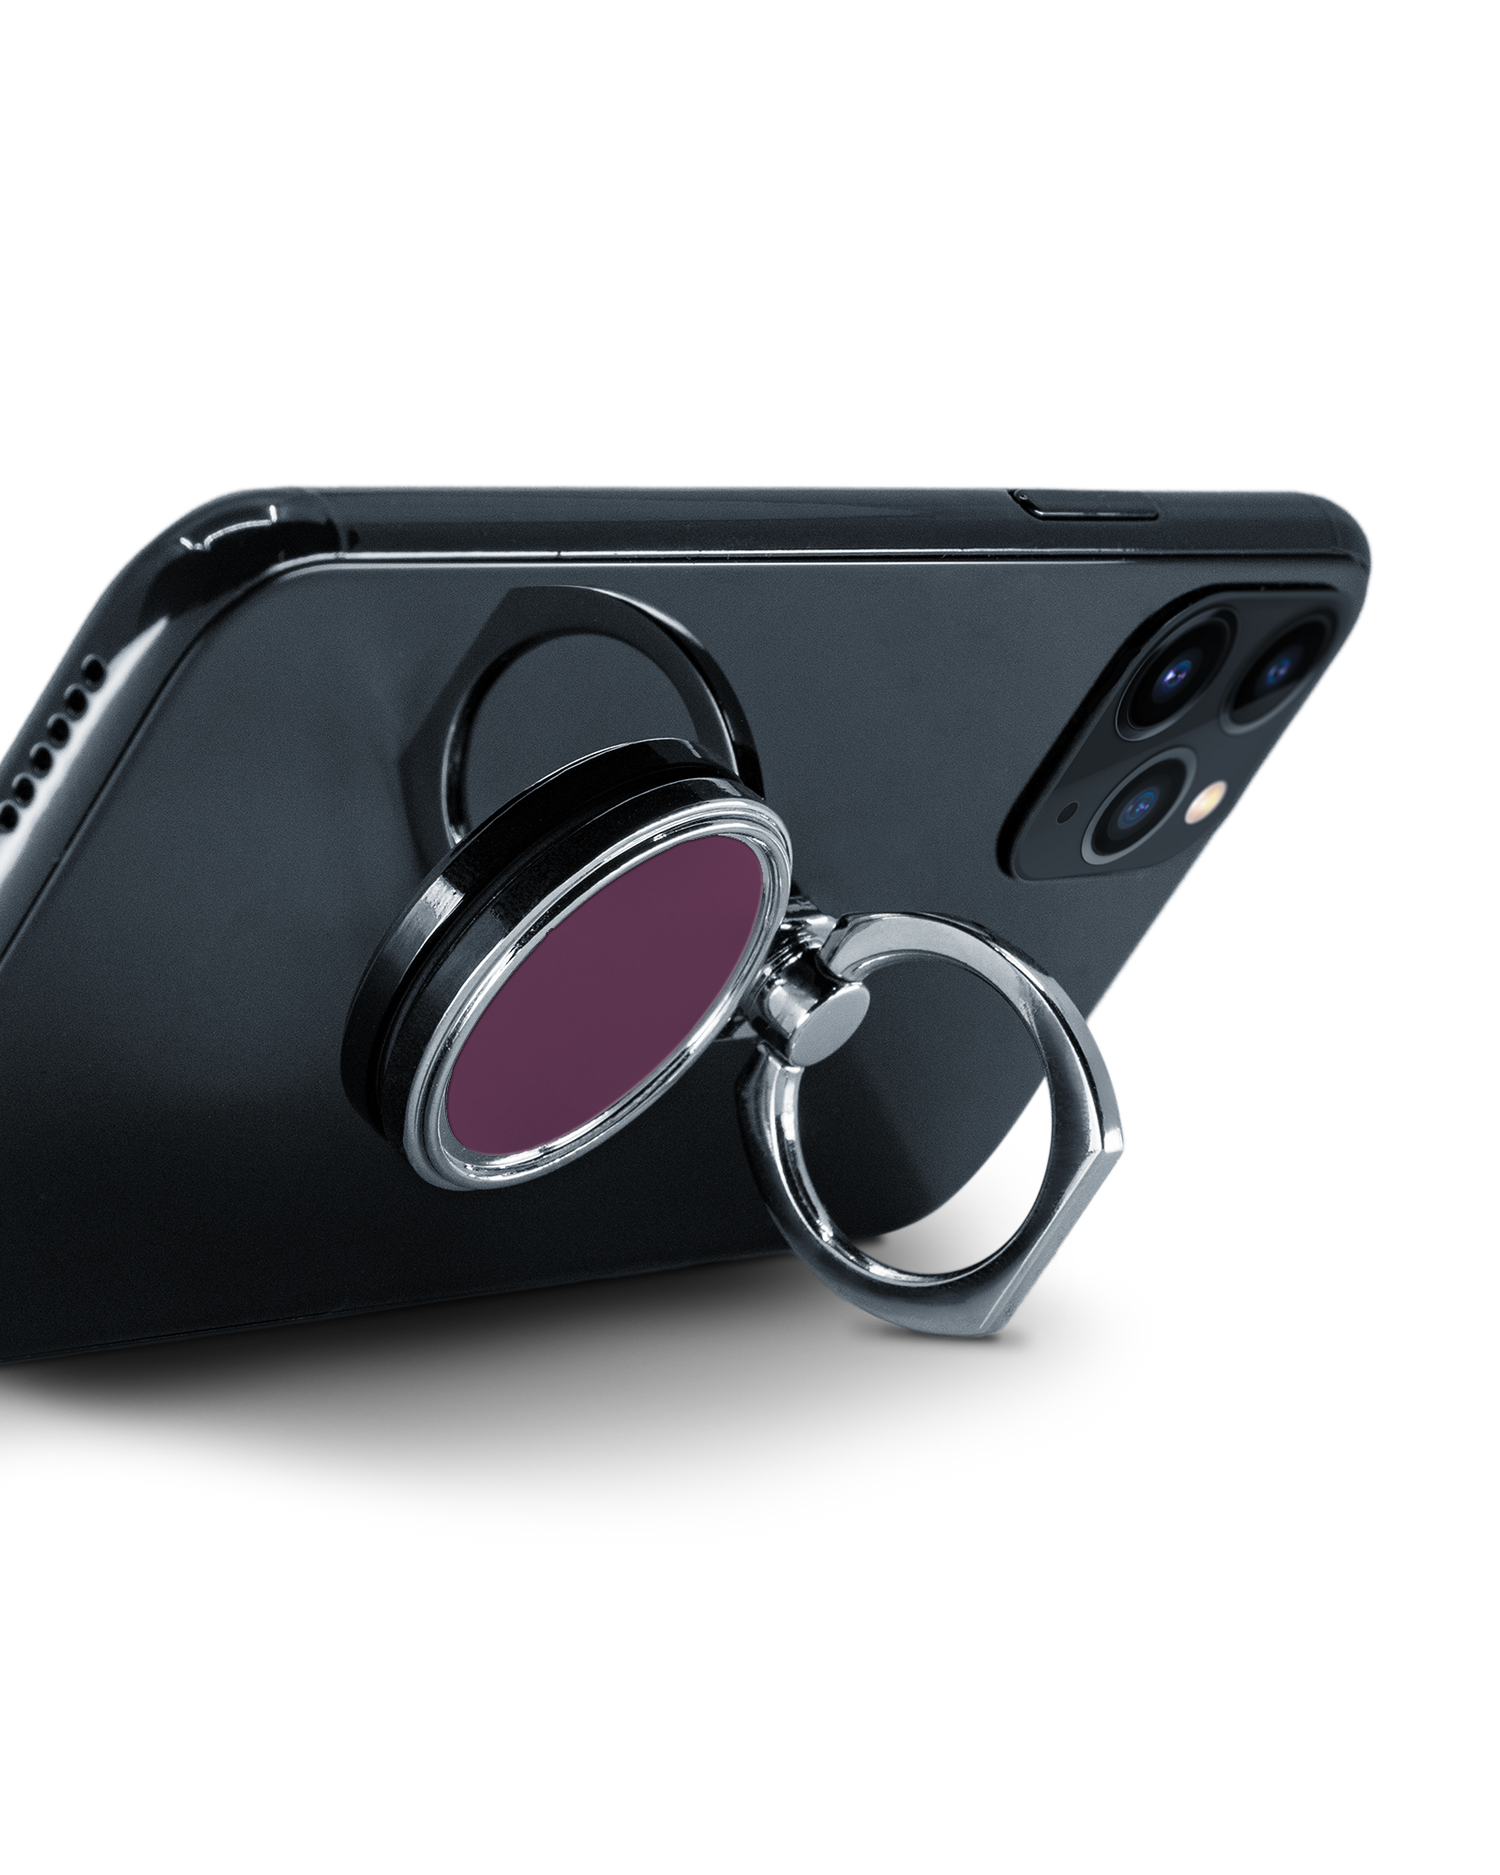 PLUM Ring Holder attached to a smartphone